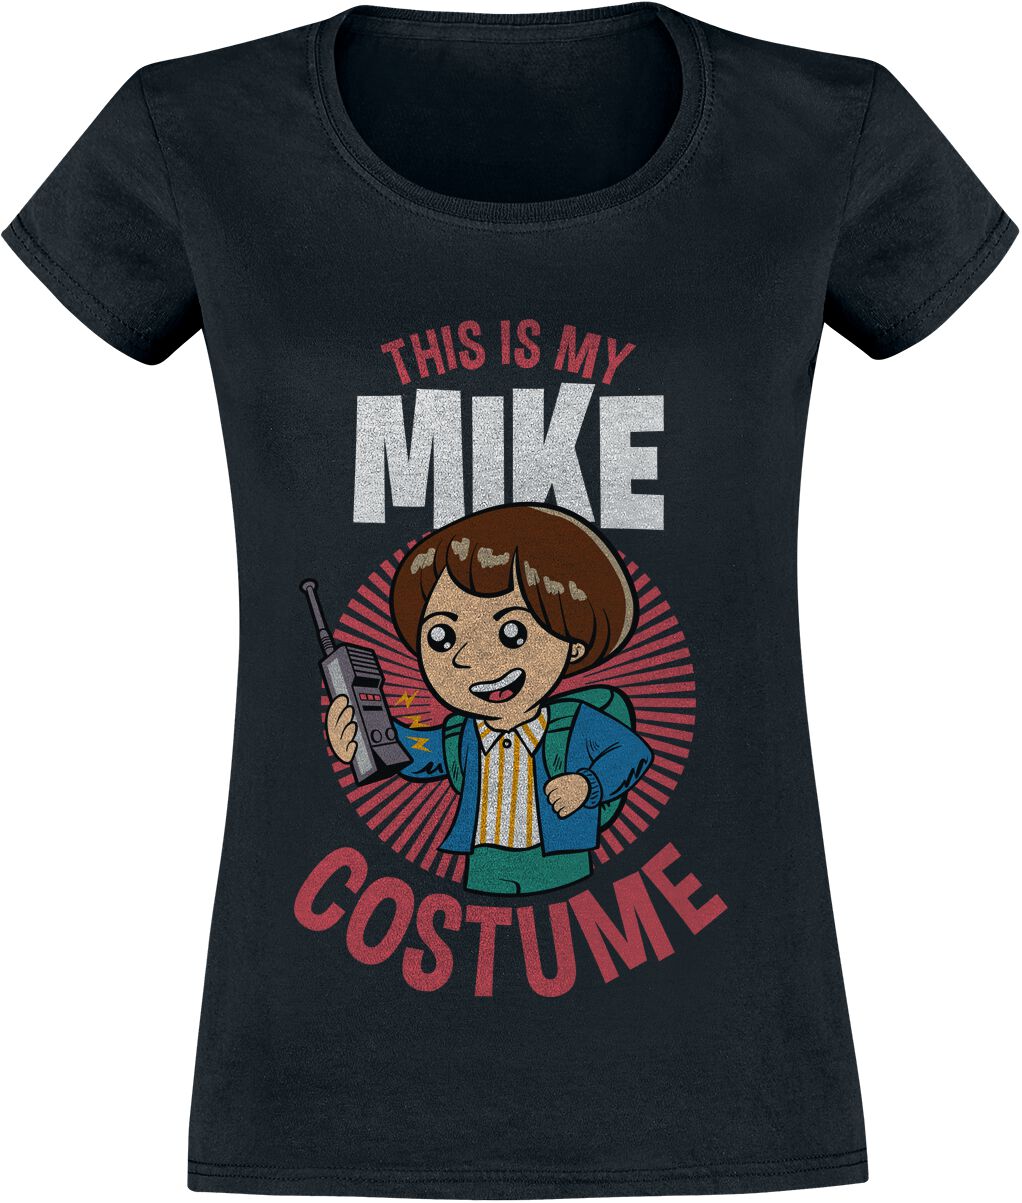 Stranger Things This is my Mike costume T-Shirt black